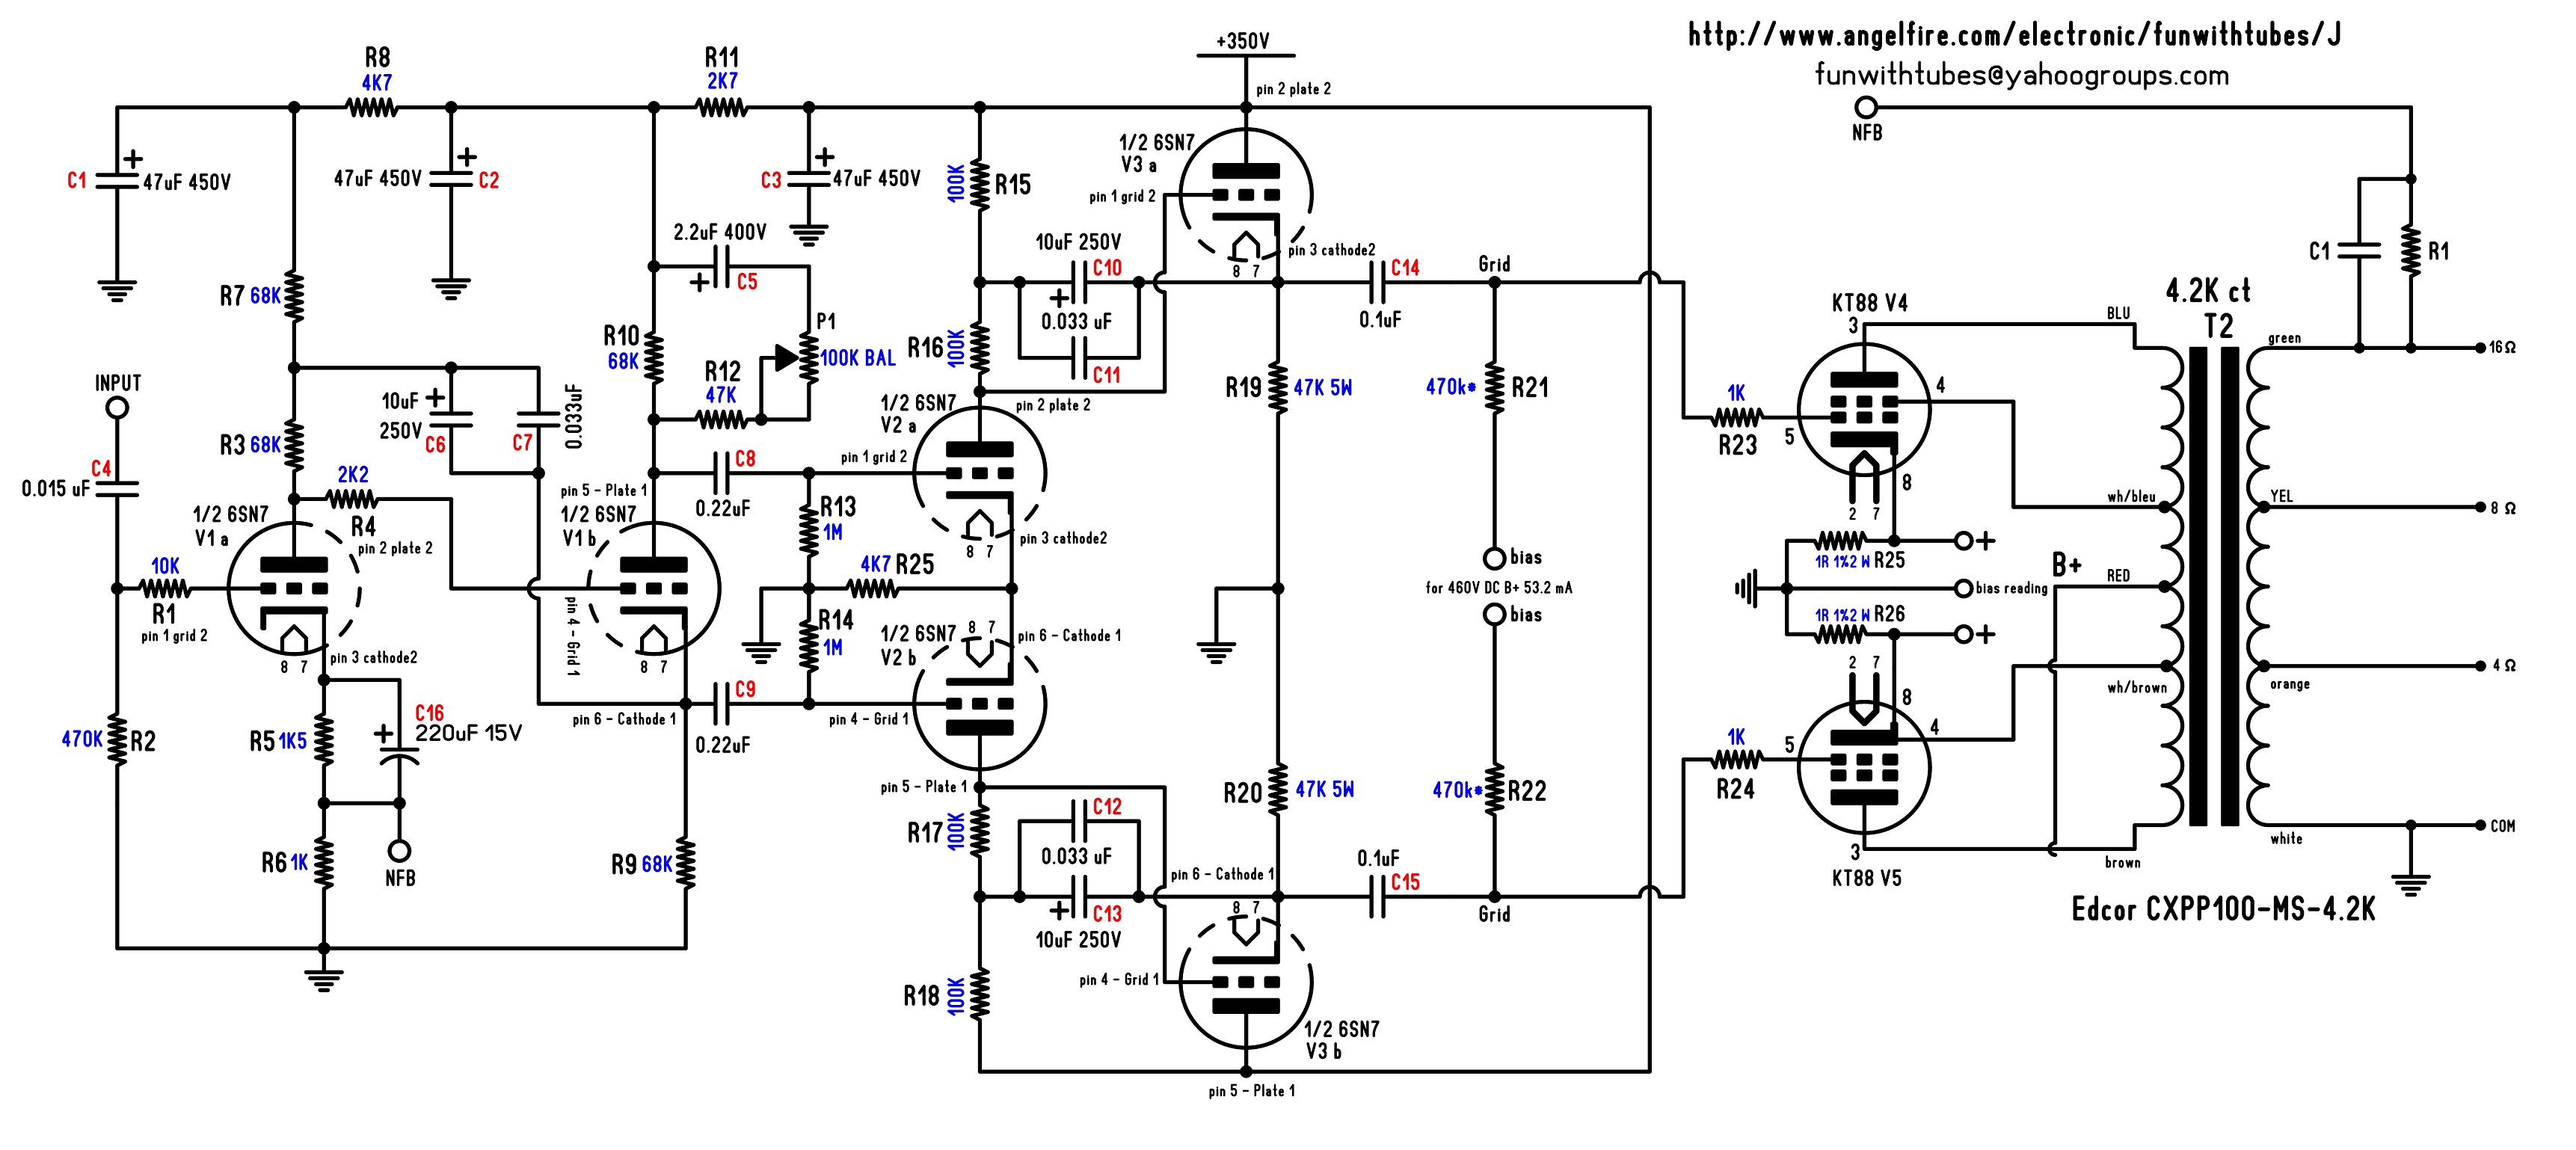 A Low Distortion Williamson Circuit by Jhon C Wise small2.jpg